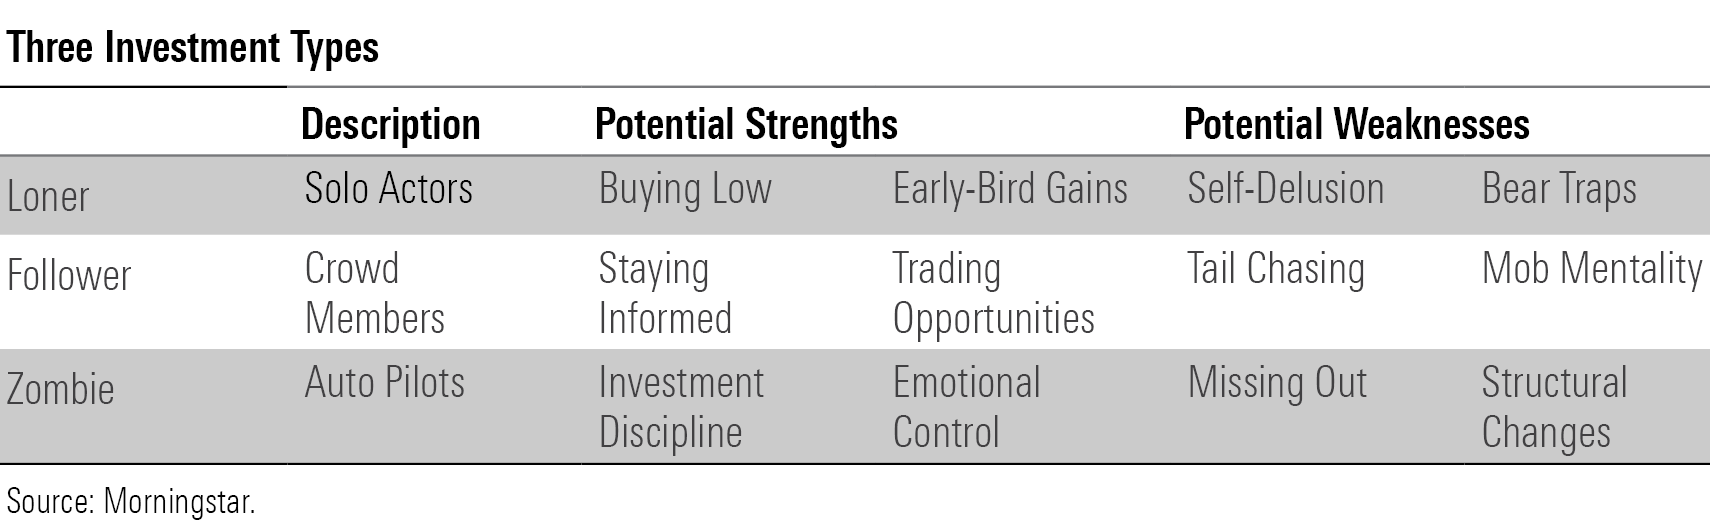 A chart showing the main characteristic of three investment personality types, along with two strengths and two weaknesses for each type.